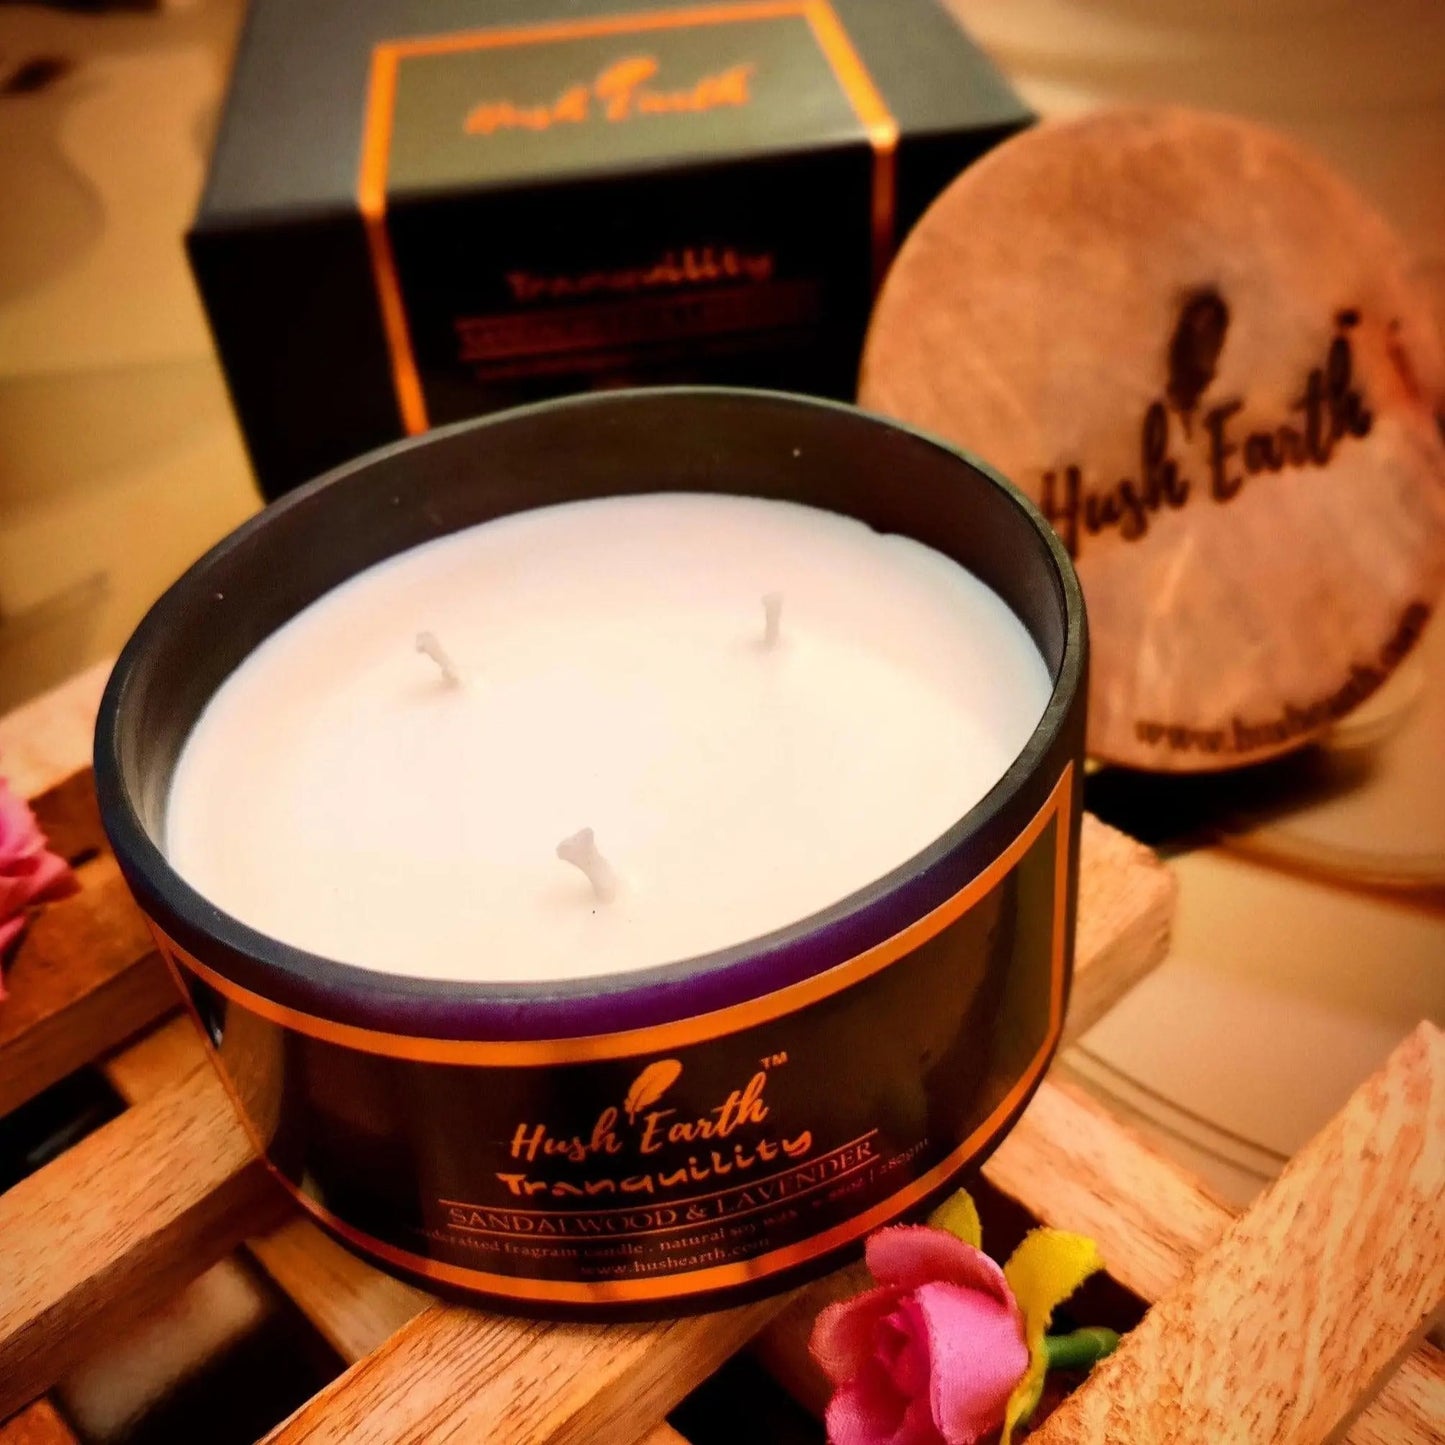 Tranquility | Sandalwood & Lavender - Hush Earth Handcrafted 3 Wick Candle-Hush Earth